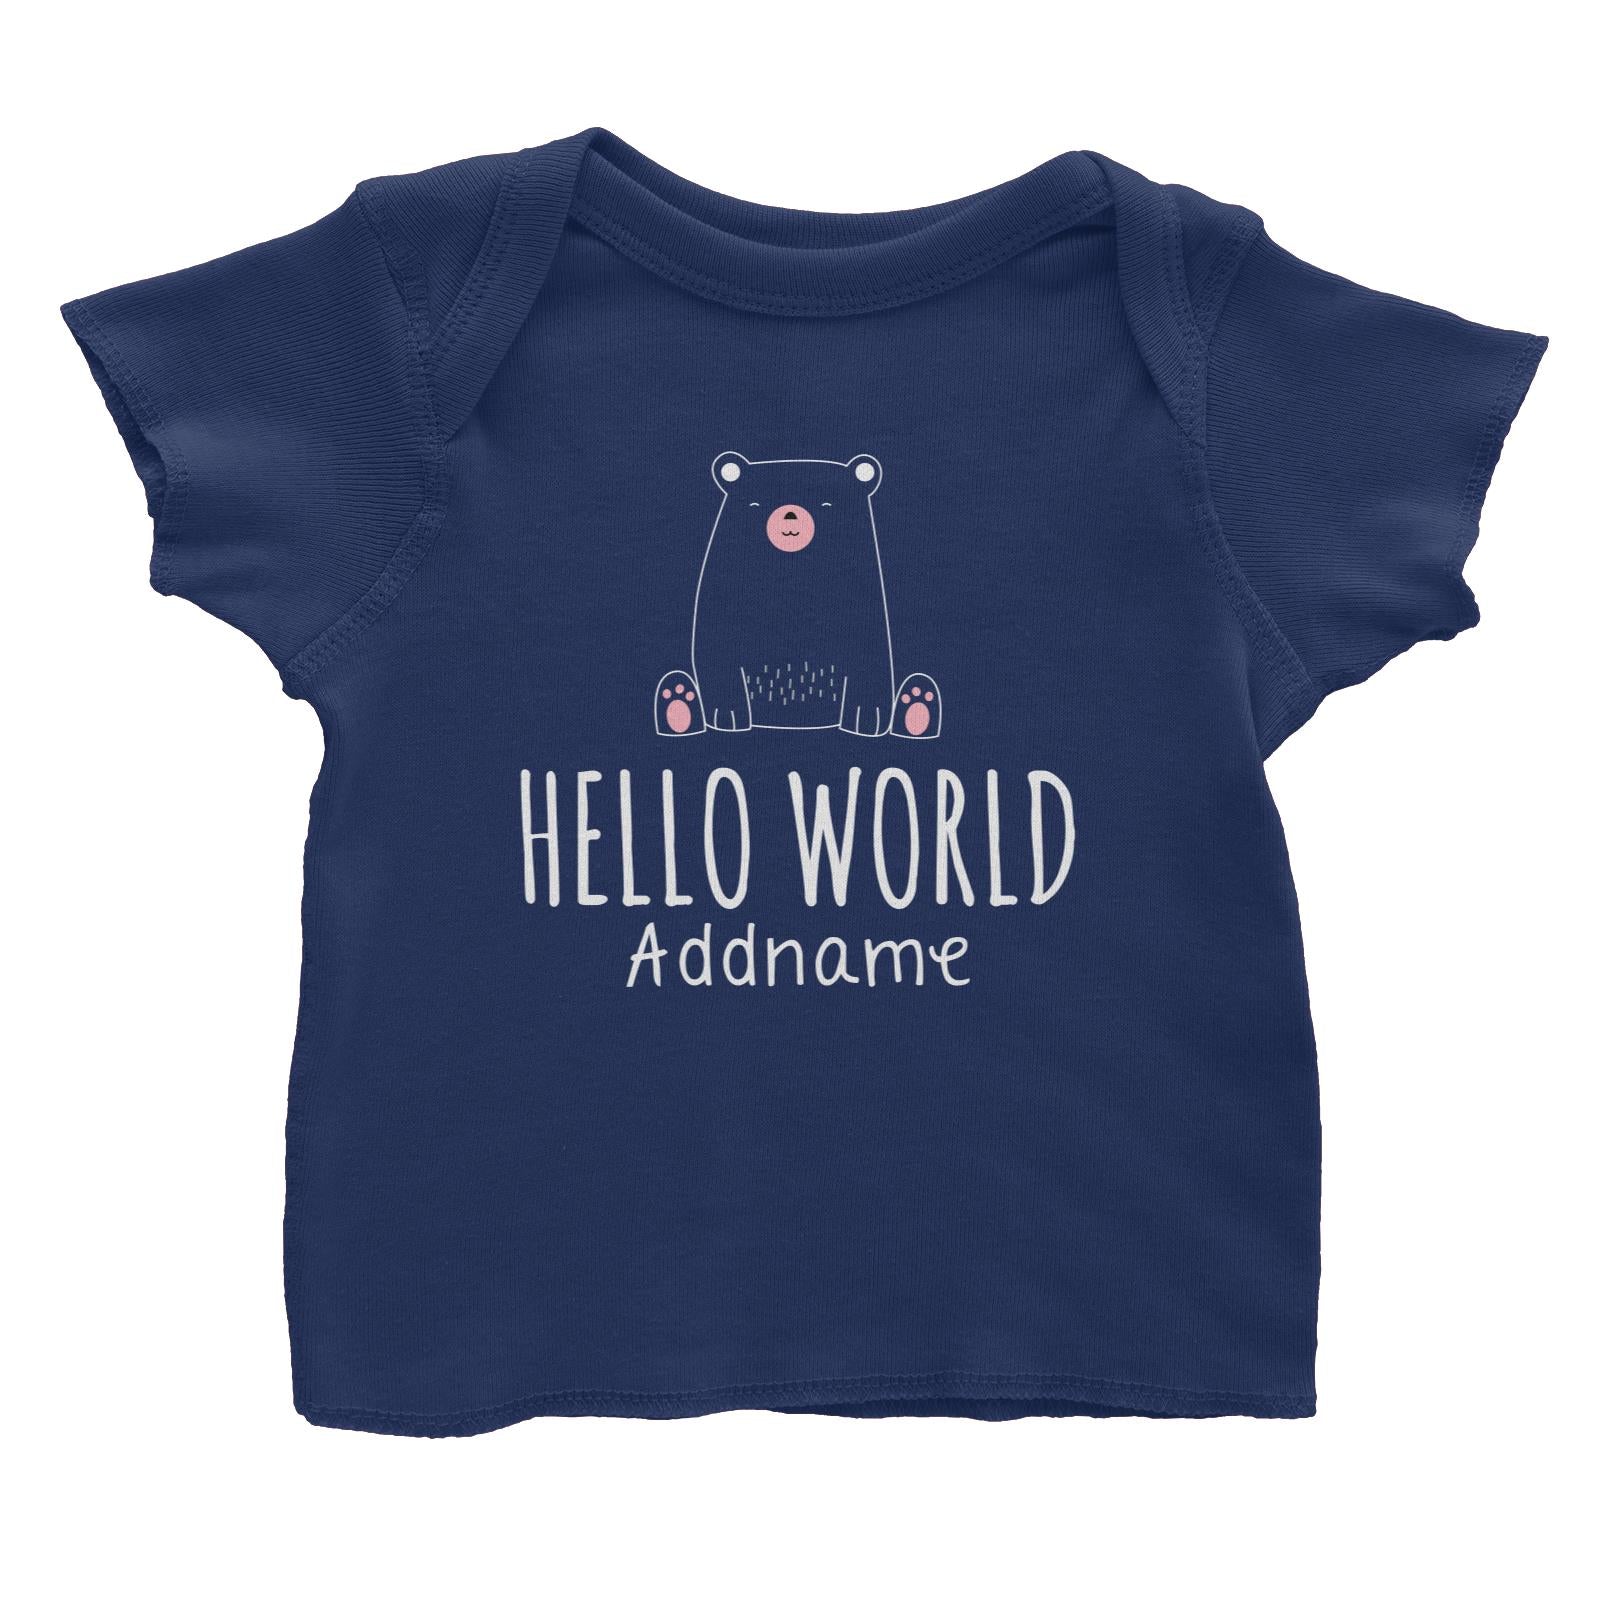 Cute Animals and Friends Series 2 Bear Hello World Addname Baby T-Shirt